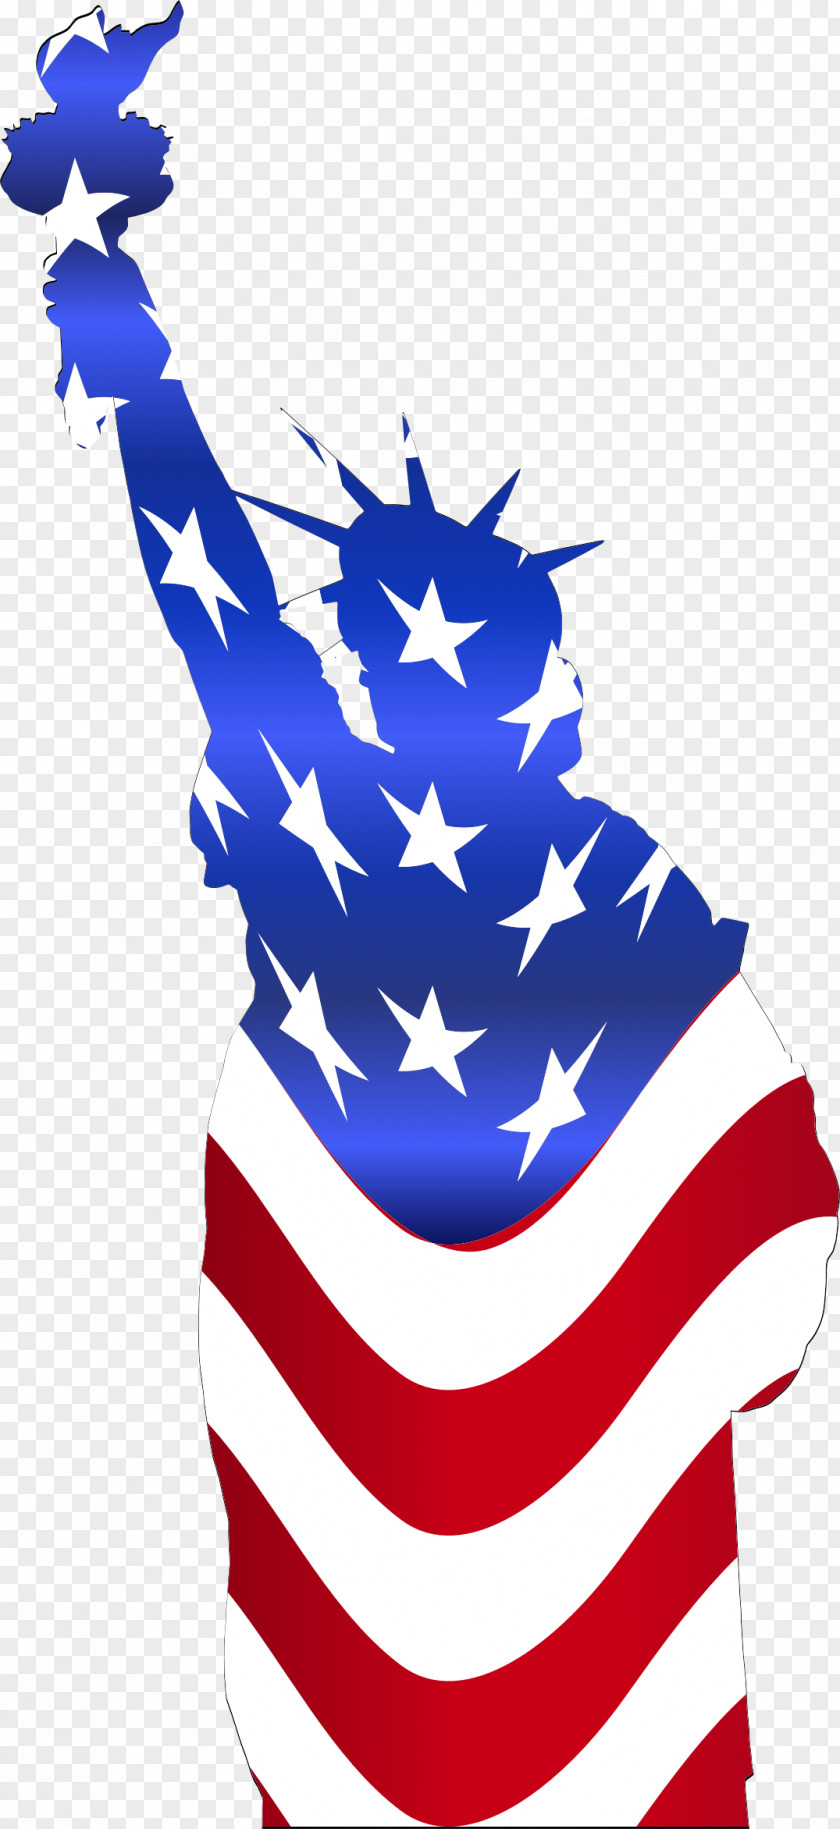 Statue Of Liberty Monument Clip Art PNG